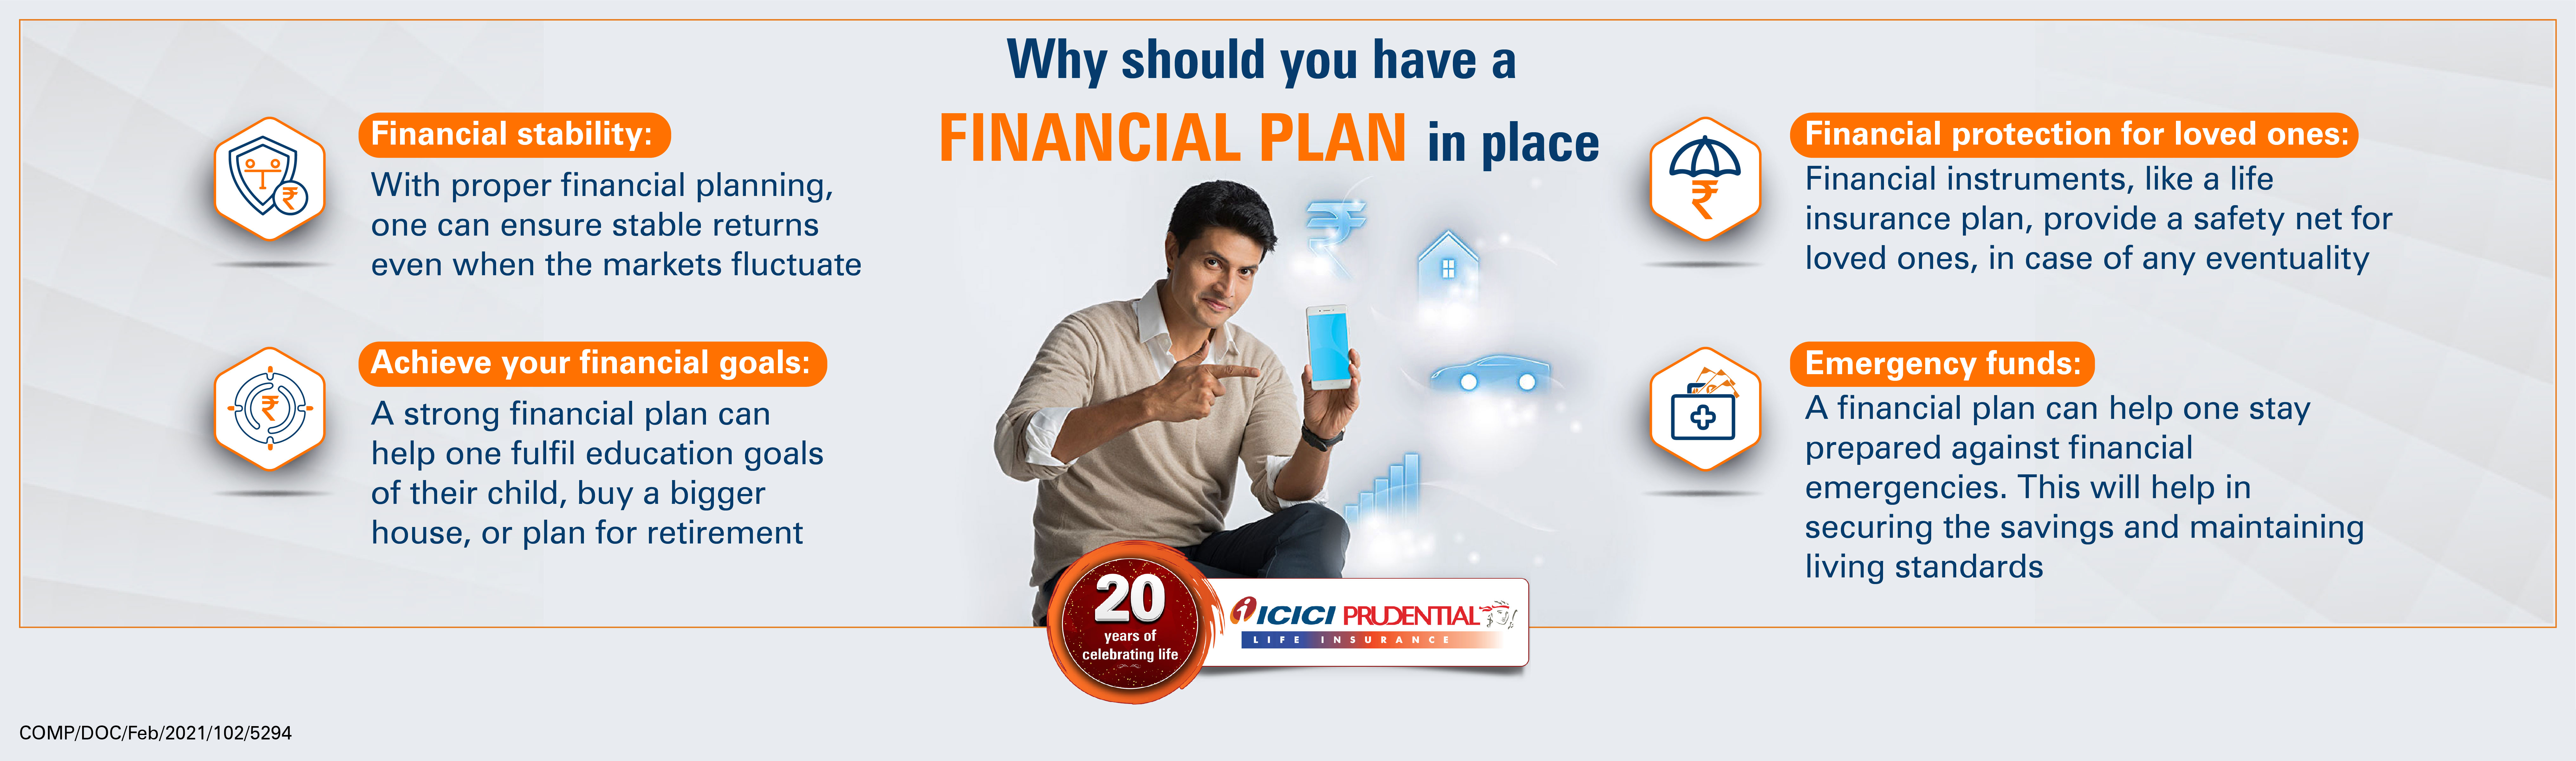 Financial-Plan-Info-with-Comp-Code